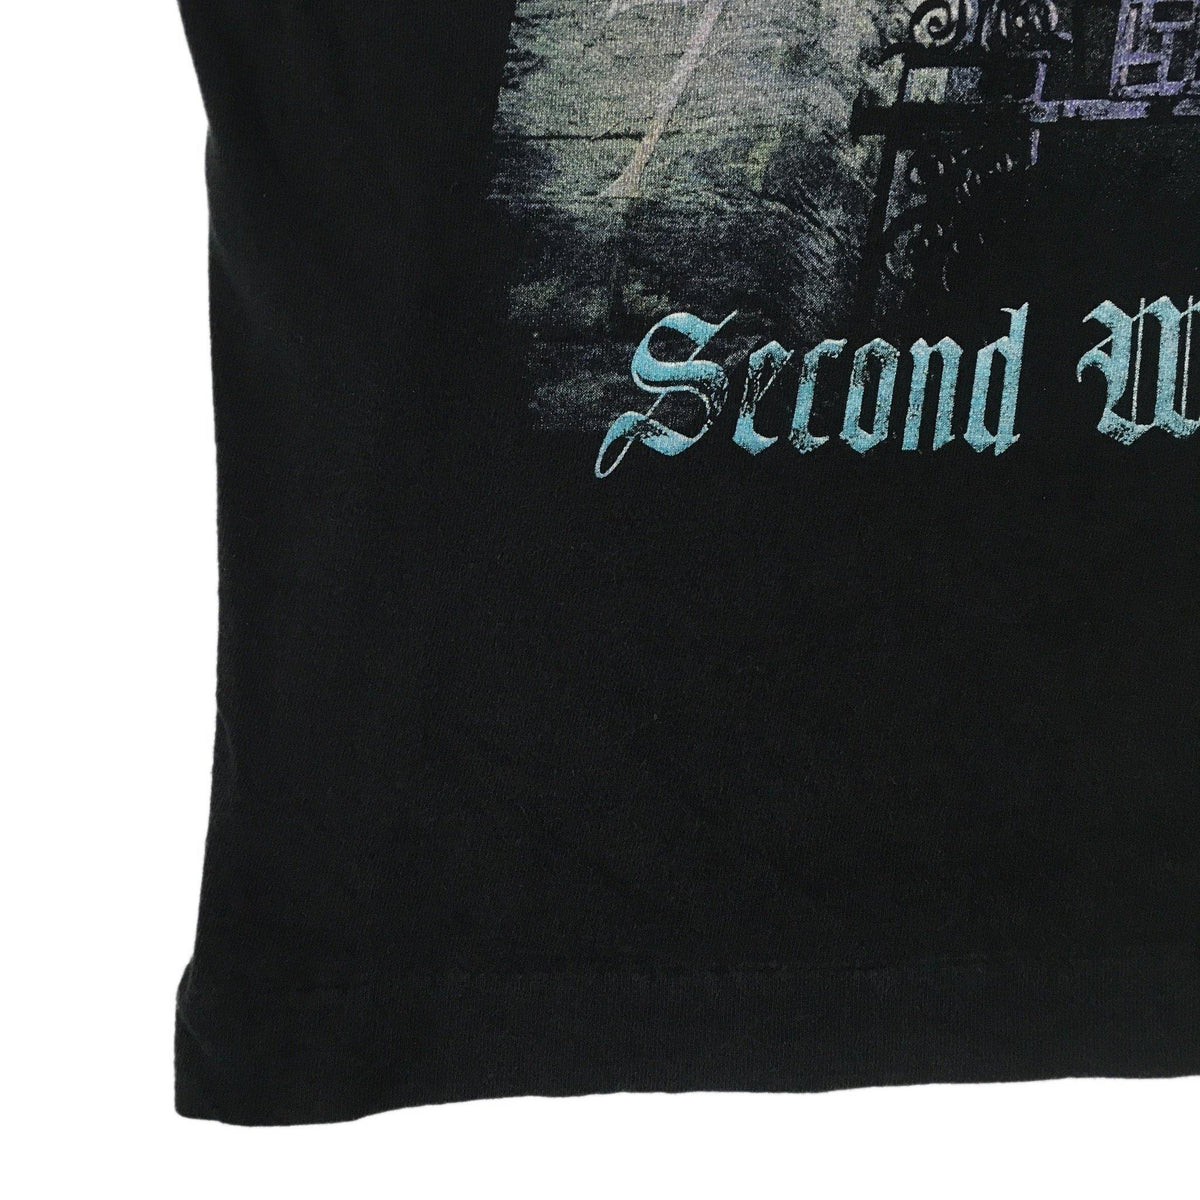 Vintage original Seven Witches Second War In Heaven T Shirt detail